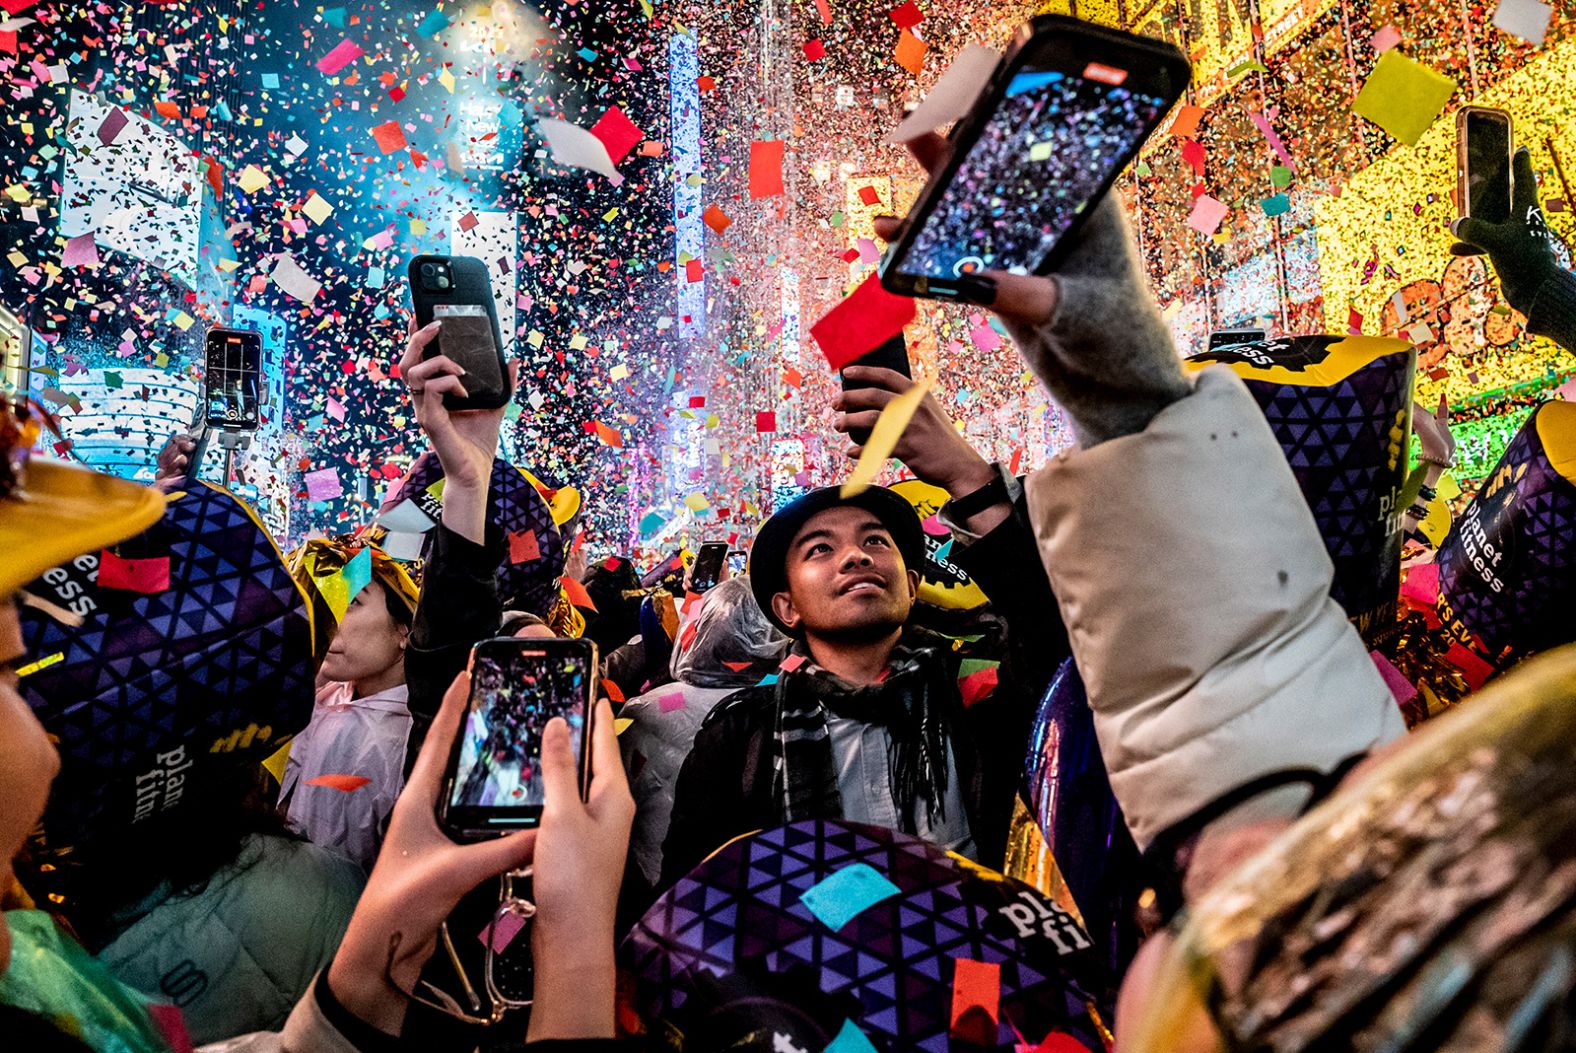 Revelers celebrate the start of the new year in New York's Times Square on Sunday, January 1. <a href="index.php?page=&url=http%3A%2F%2Fwww.cnn.com%2F2022%2F12%2F31%2Fworld%2Fgallery%2F2023-new-year-celebrations%2Findex.html" target="_blank">See more New Year's celebrations around the world</a>.